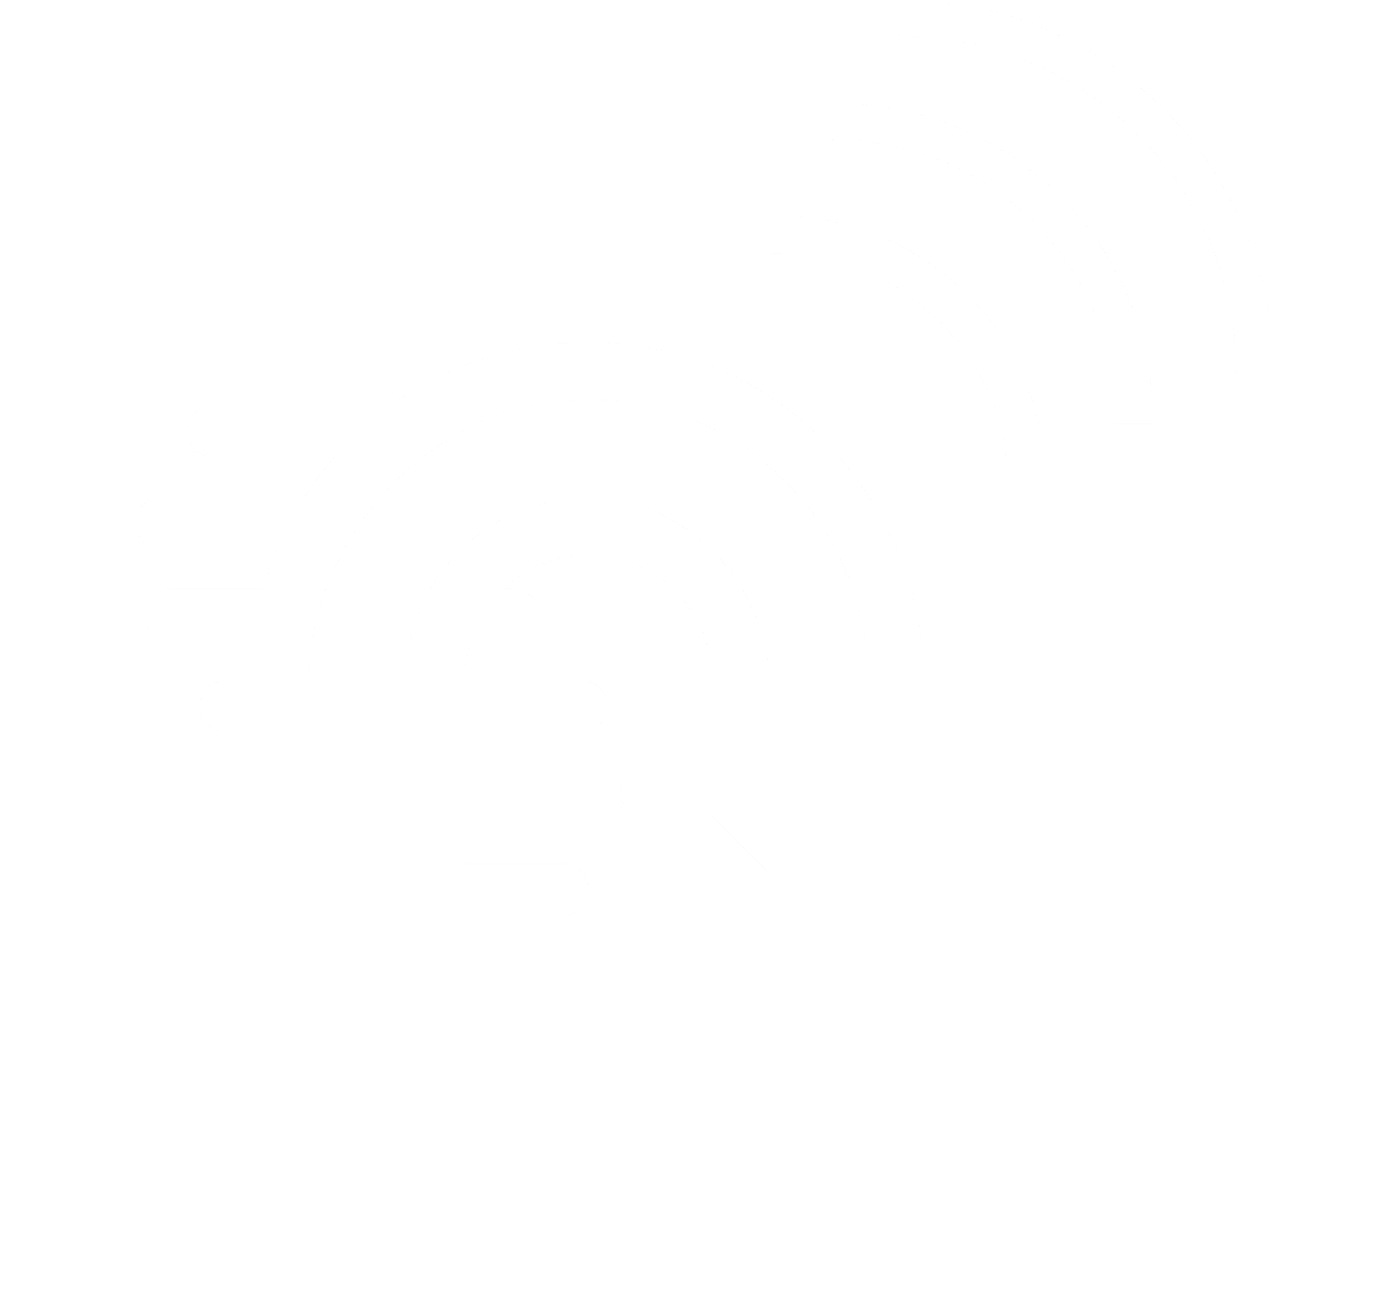 Podcast entreprise now coworking